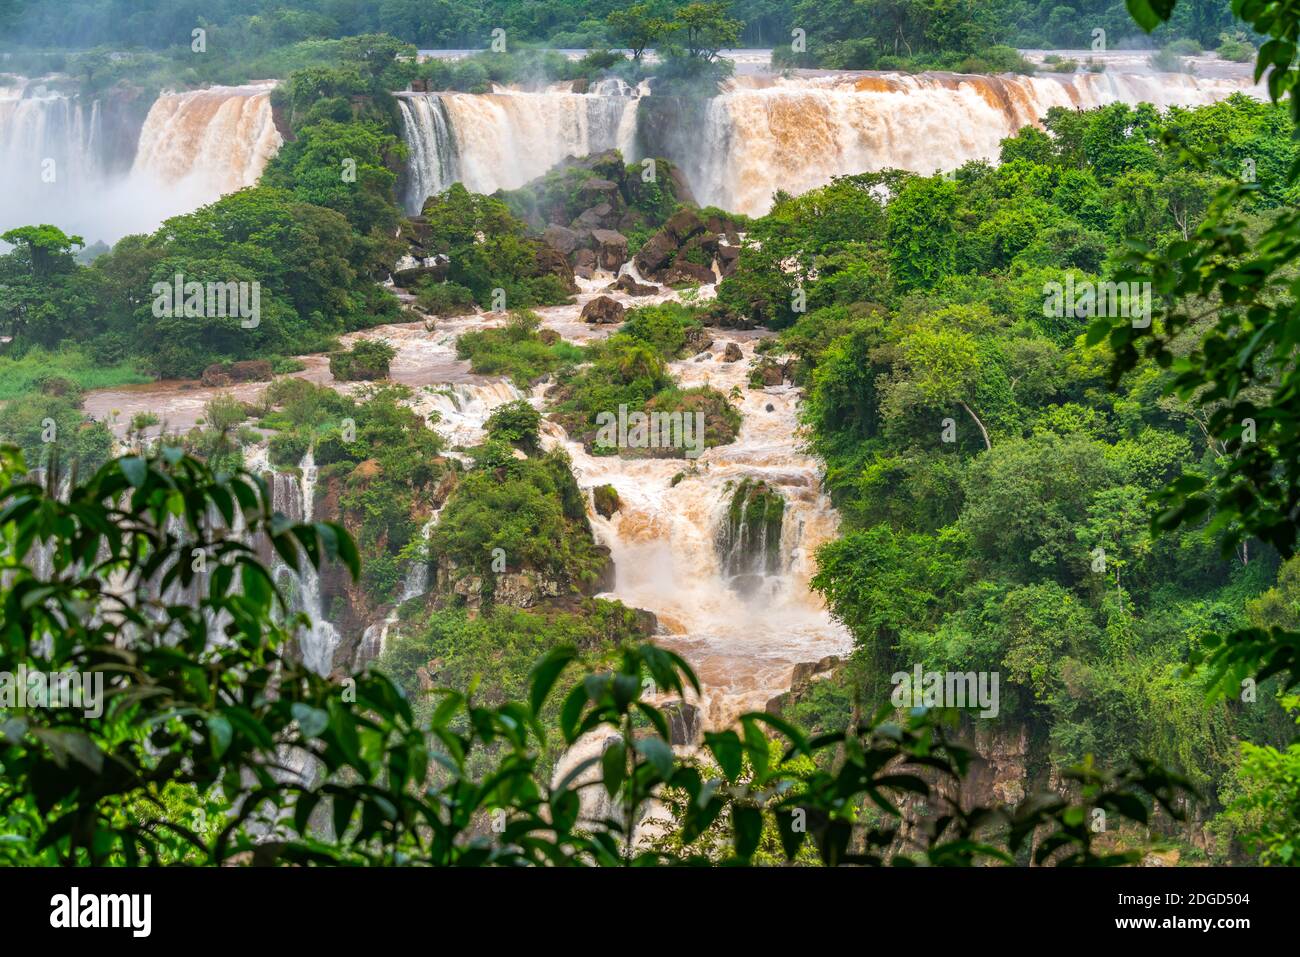 View of the famous Iguazu Falls from Brazilian side. Stock Photo